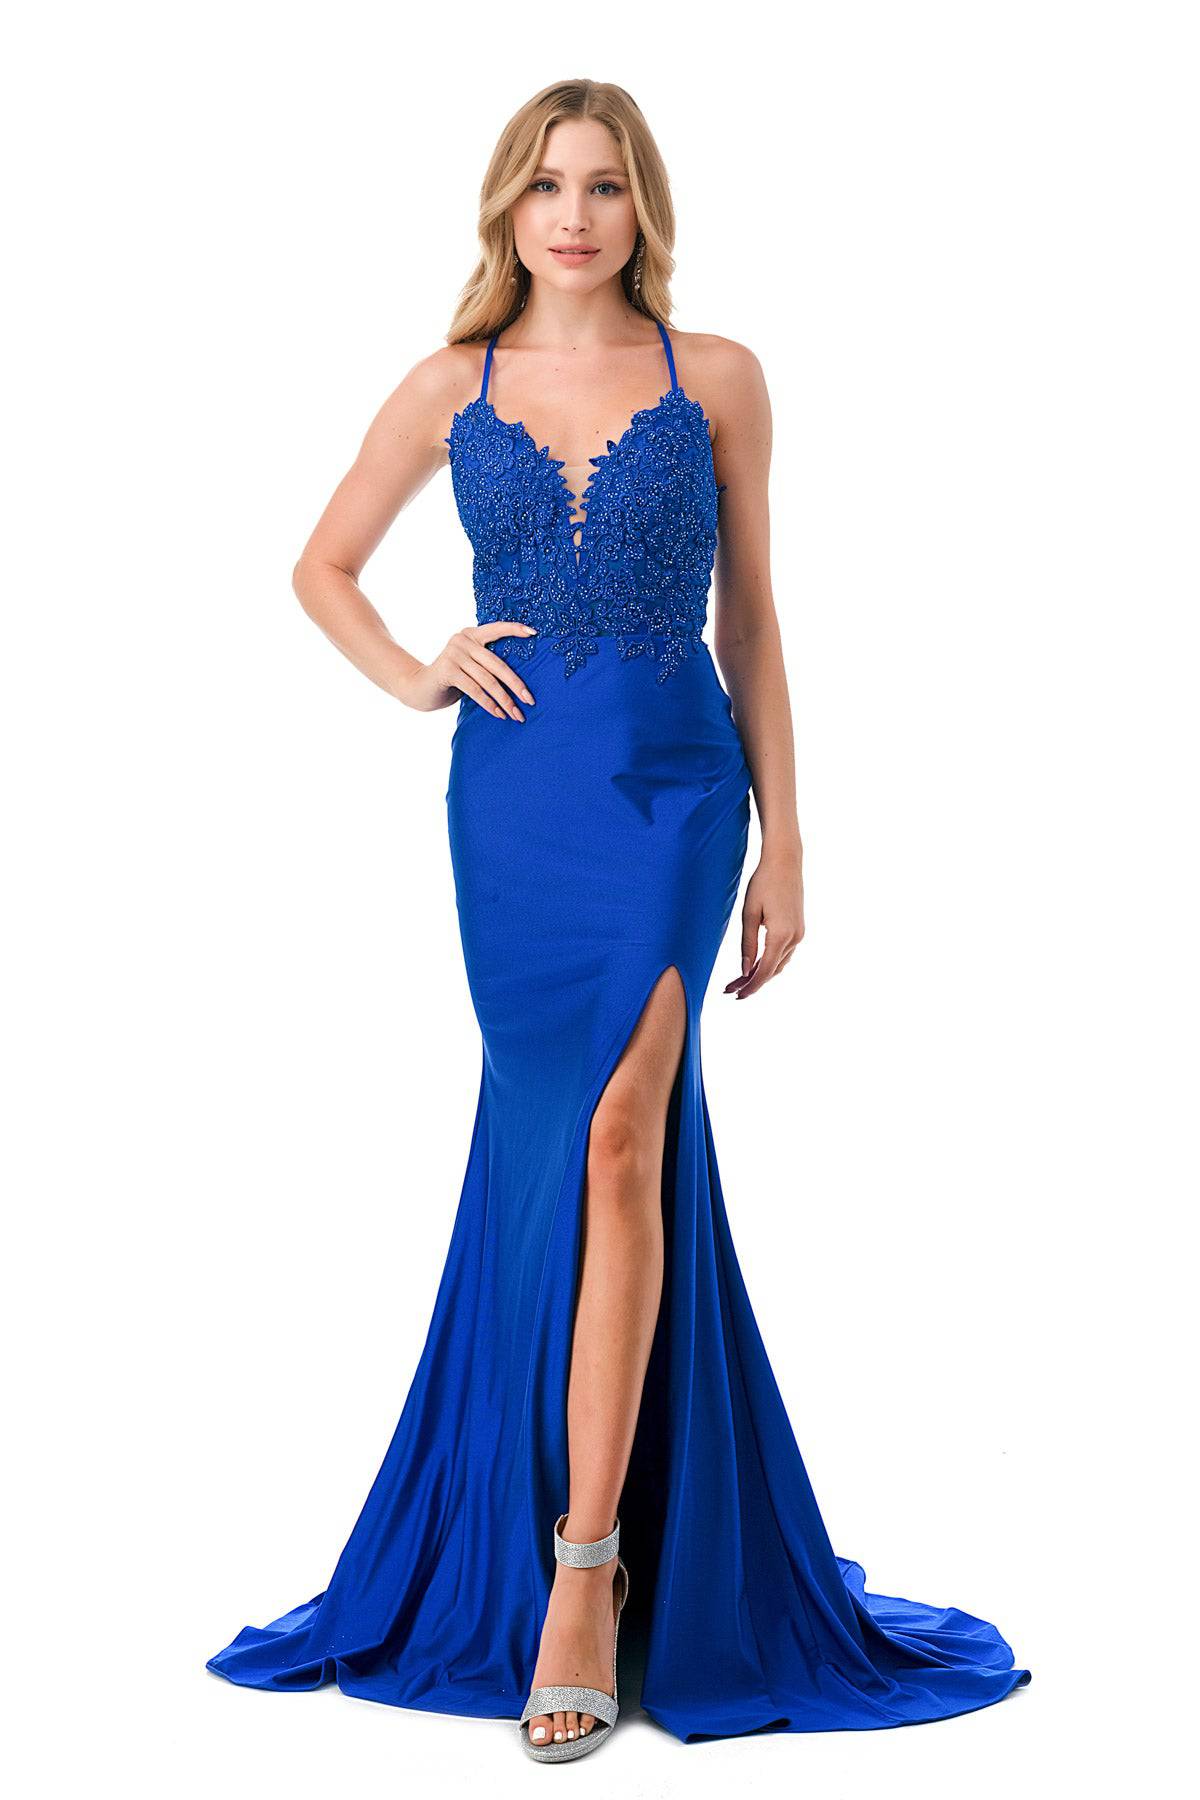 Aspeed Design L2814T Royal Blue Floral Lace Embroidered Slit Leg Dress - NORMA REED